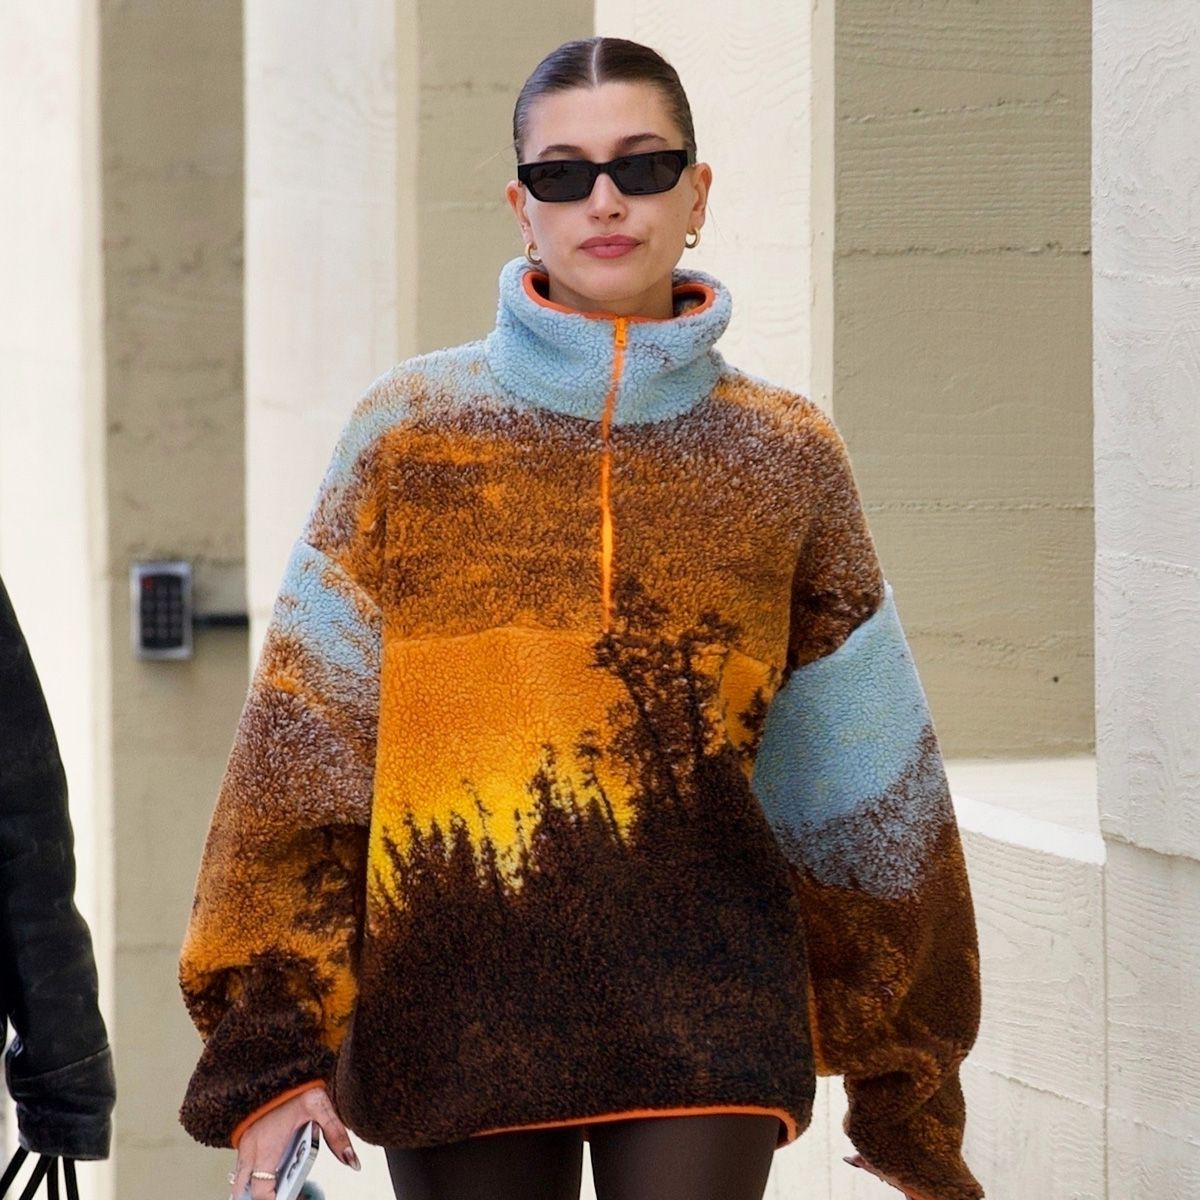 Hailey Bieber Shows What to Wear With Leggings in the Winter